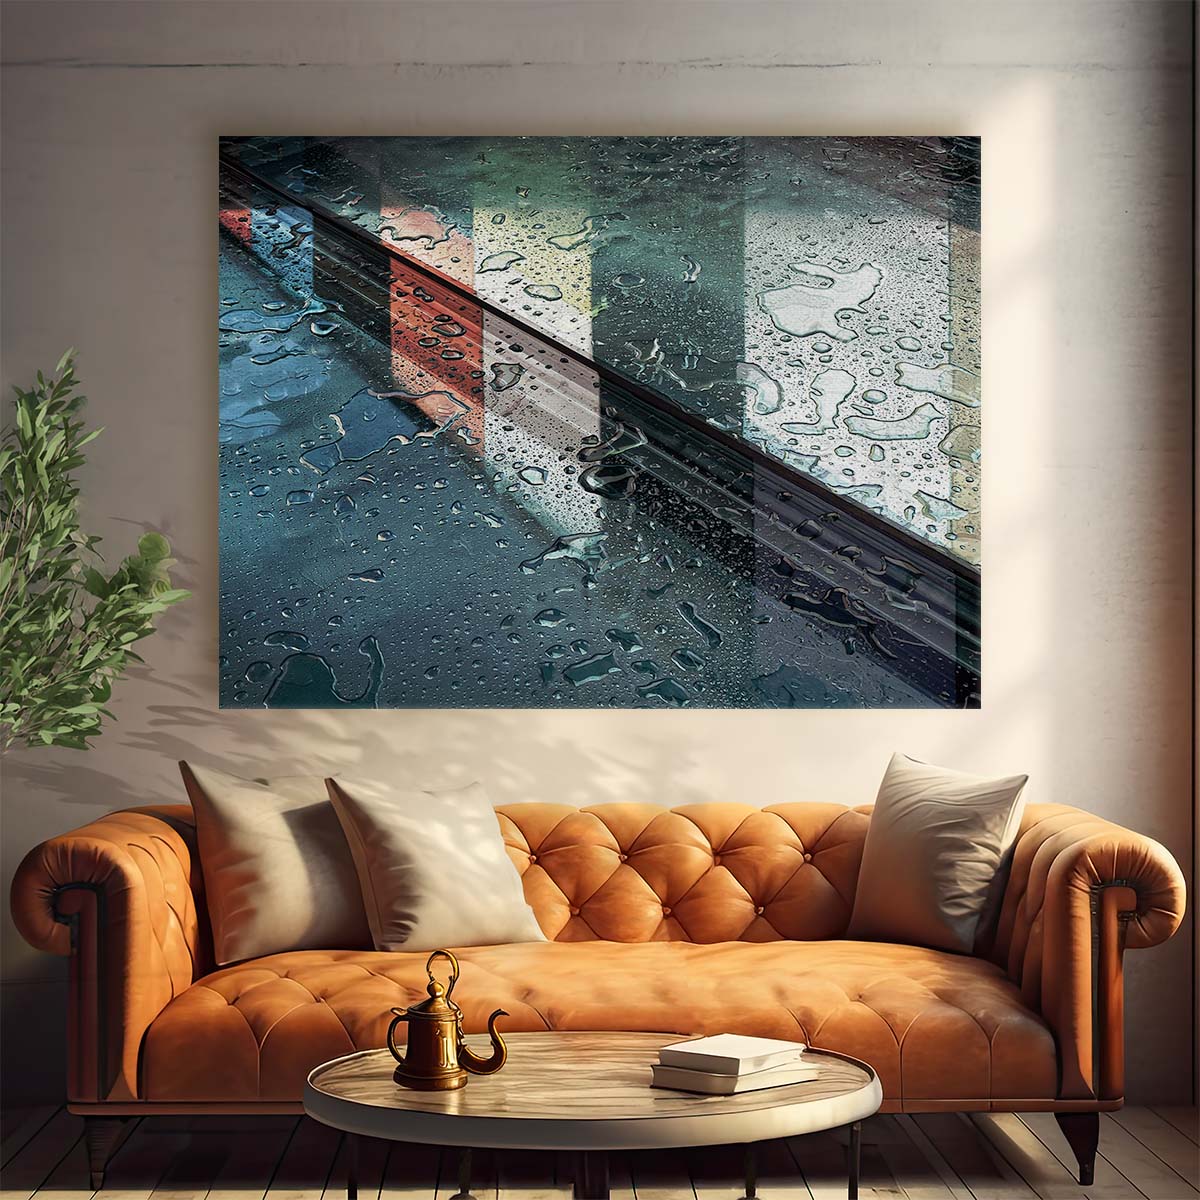 Colorful Reflections & Lines Architecture Wall Art by Luxuriance Designs. Made in USA.